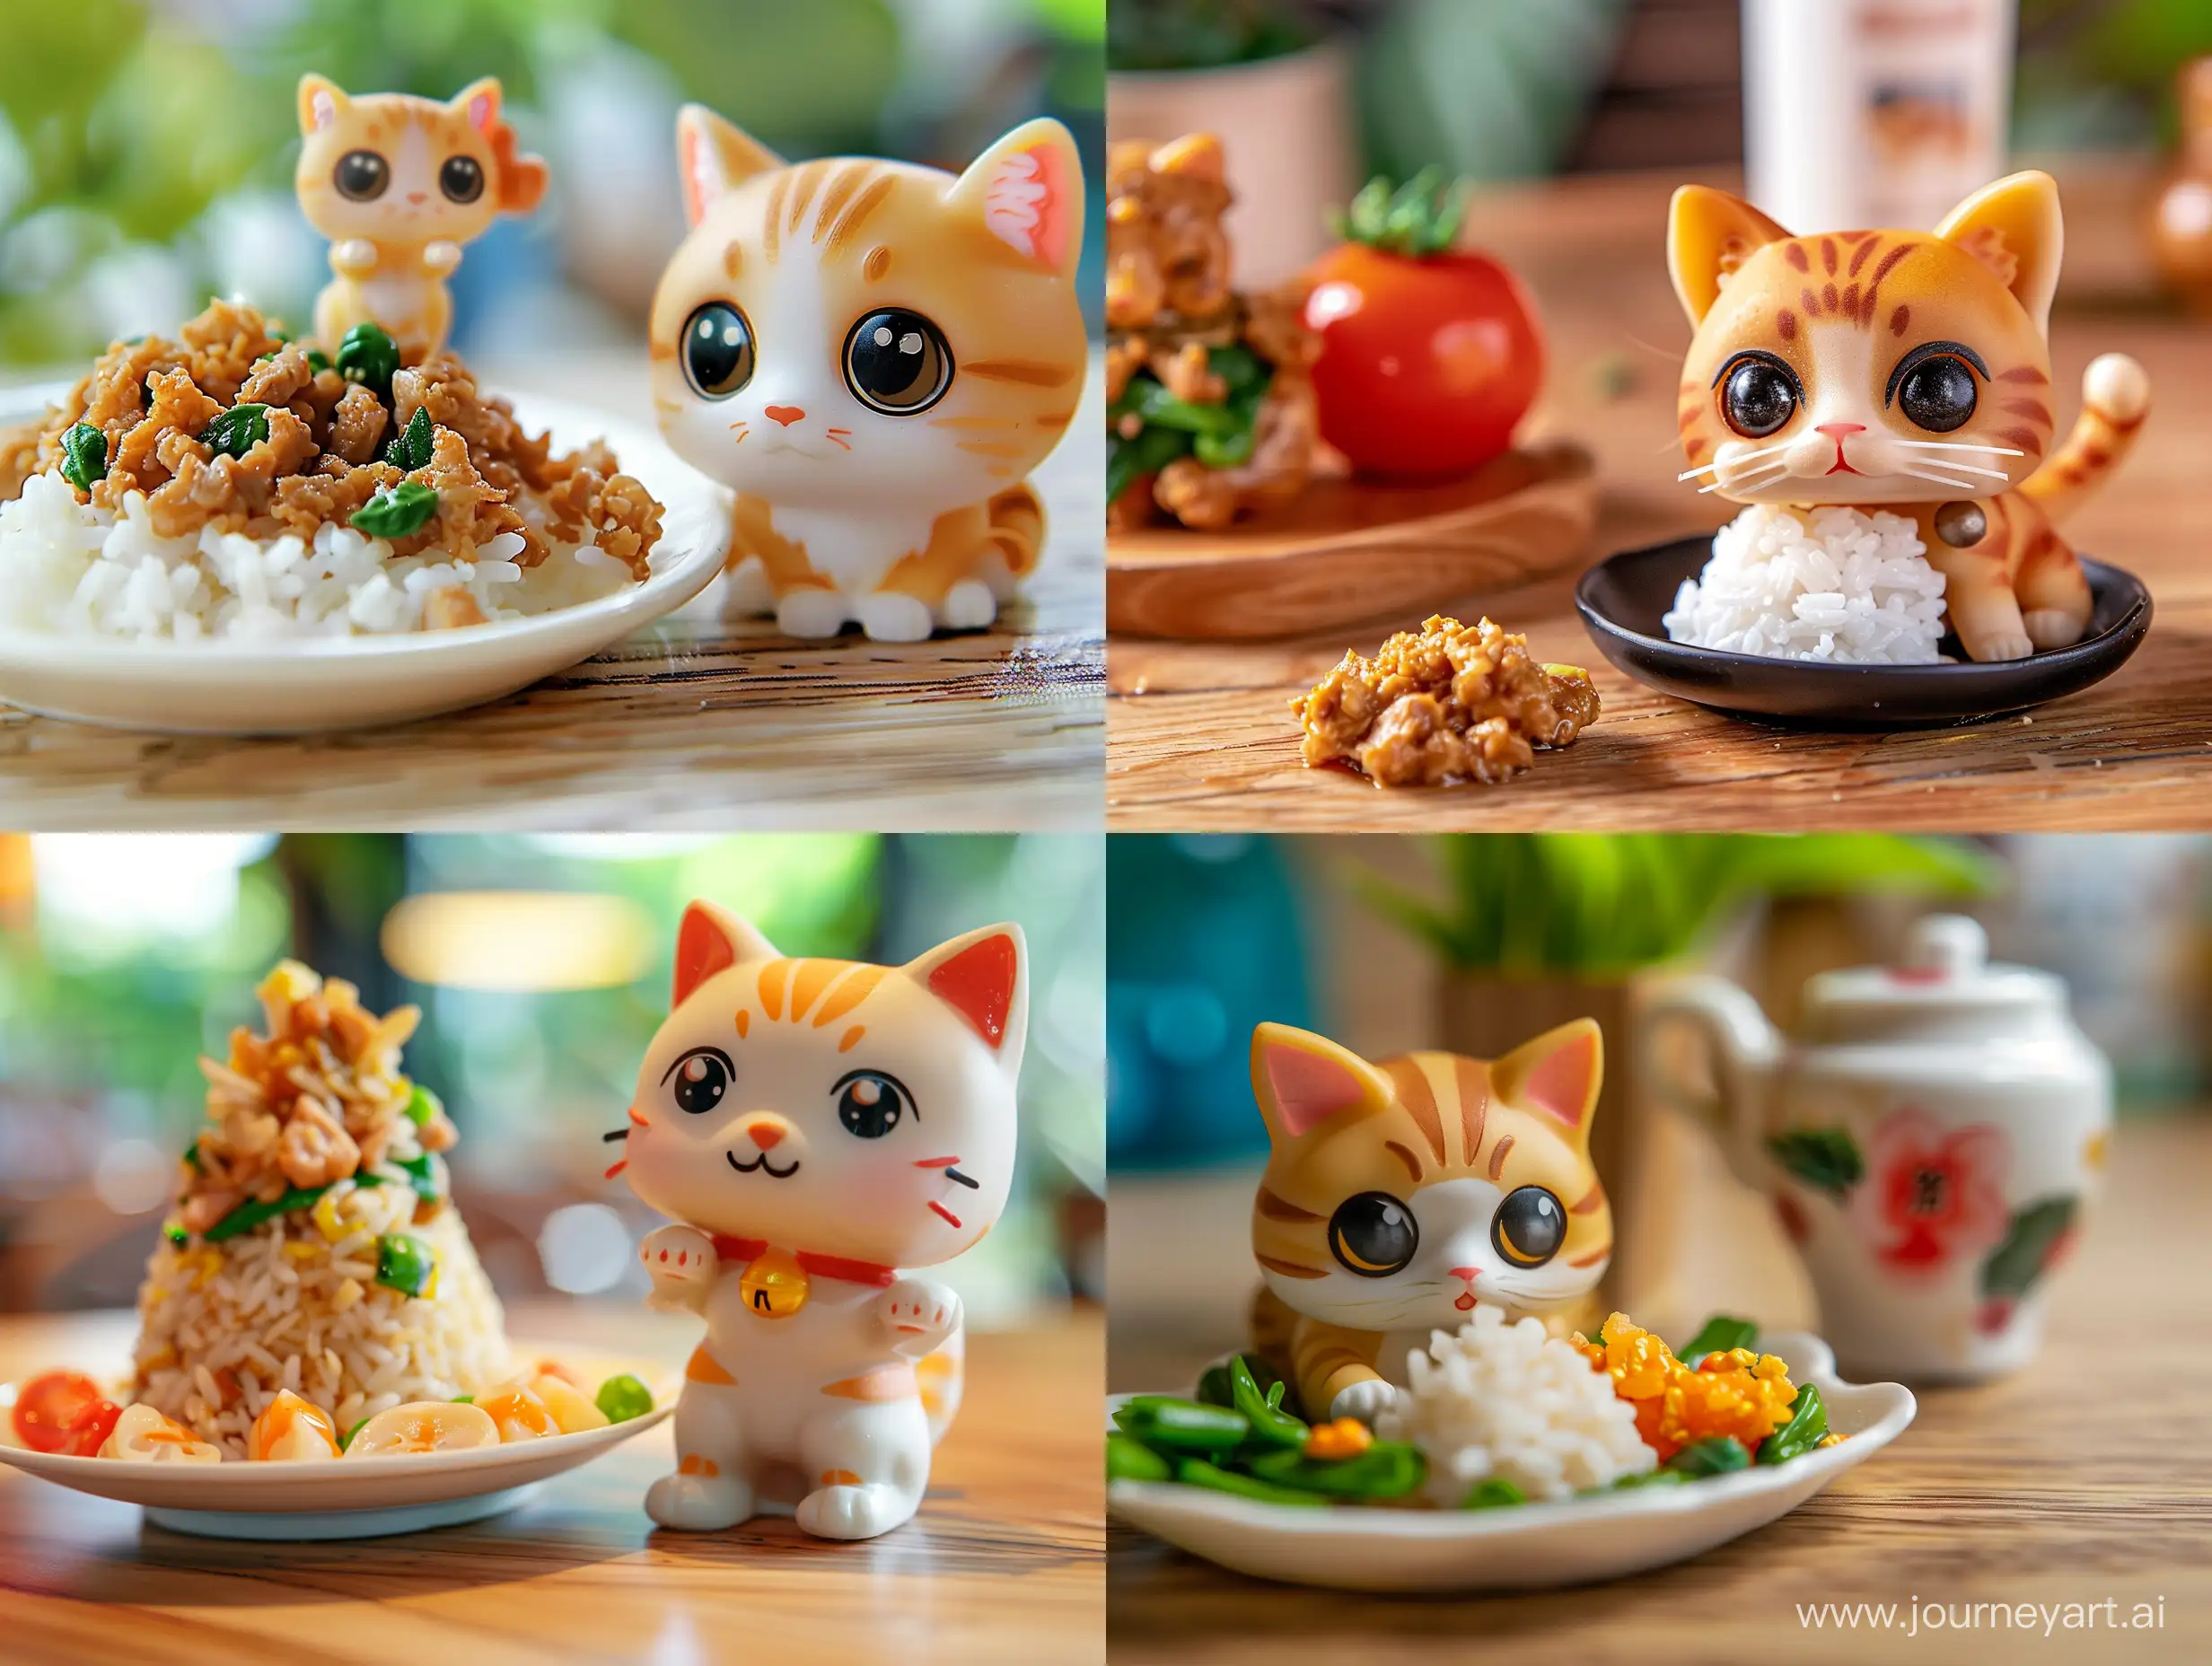 Thai holy basil fried mince pork with rice dish for delivery appmenu with zoom in a small cute cat action figure.